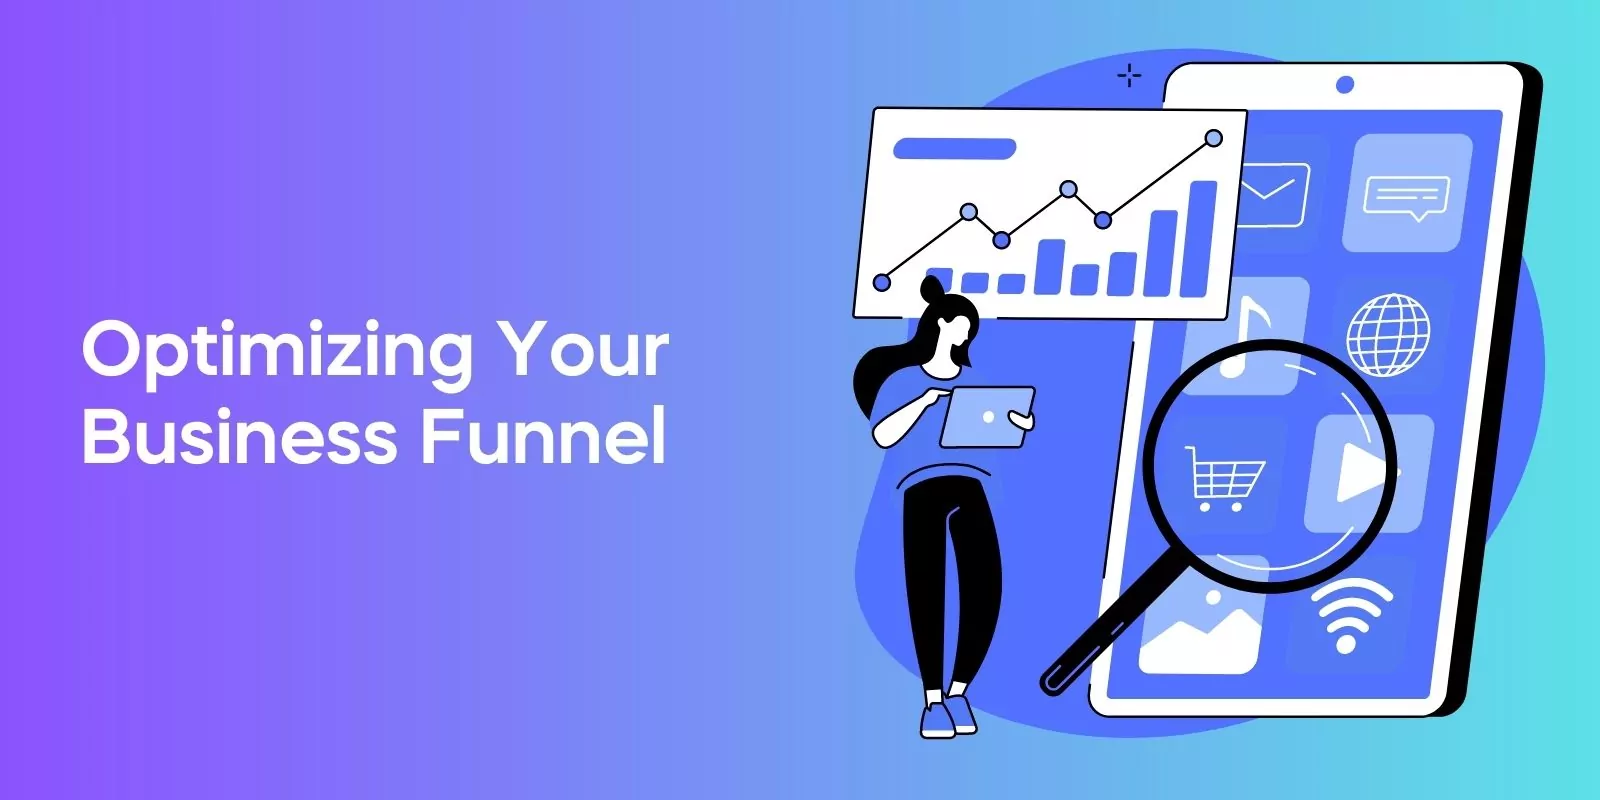 Optimizing Your Business Funnel